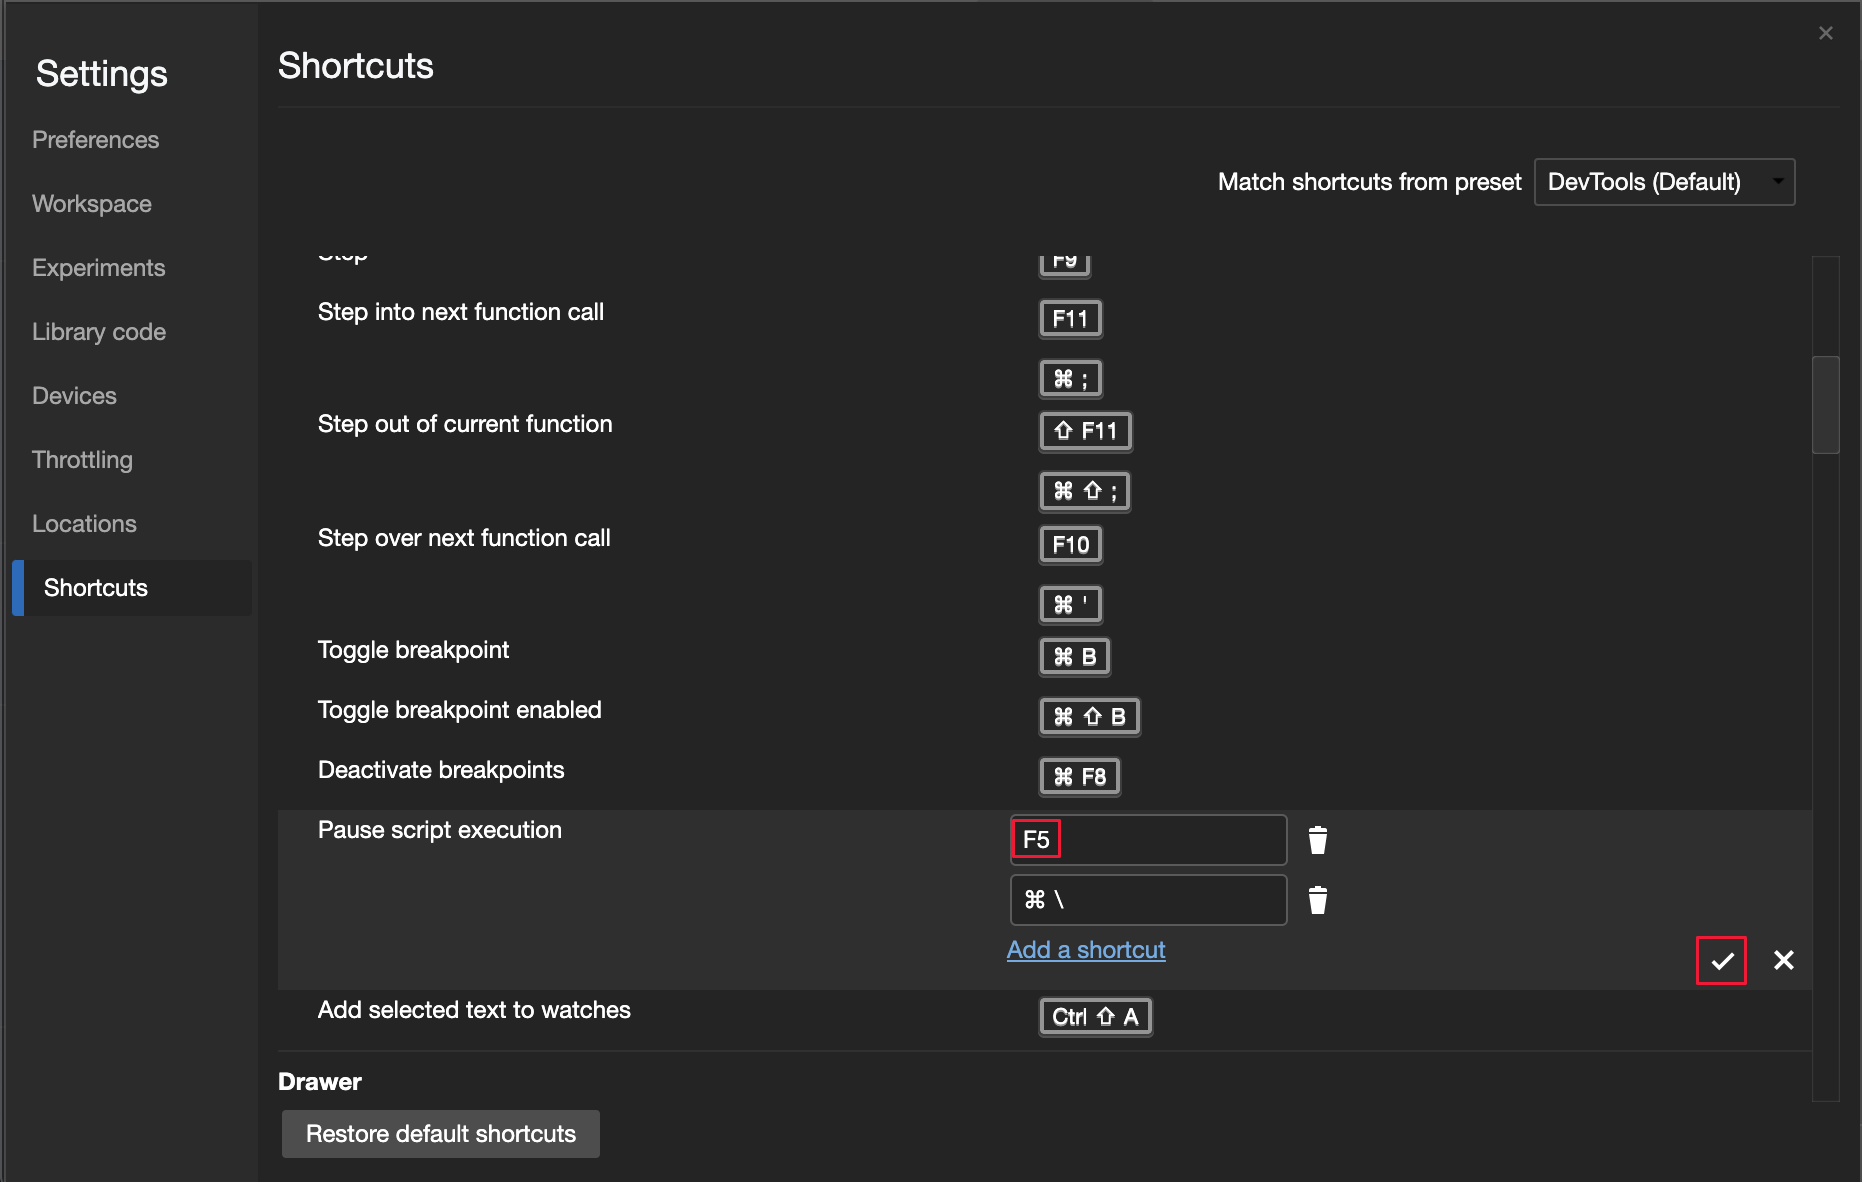 Customize keyboard shortcuts in the DevTools Settings on Shortcuts with a shortcut in edit mode